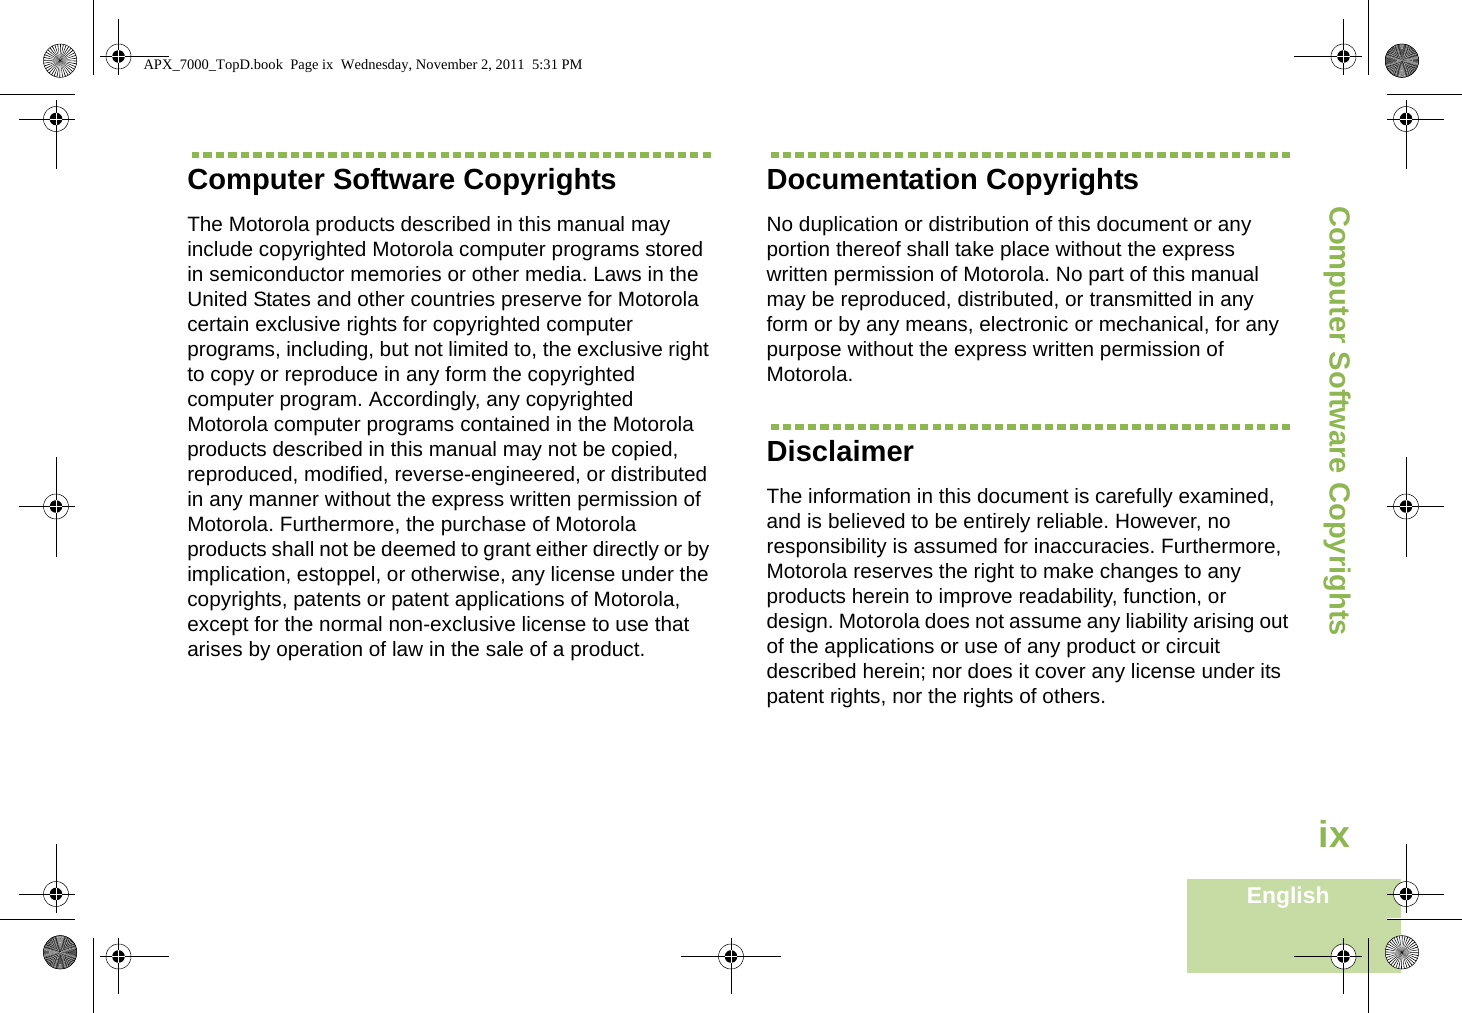 Computer Software CopyrightsEnglishixComputer Software CopyrightsThe Motorola products described in this manual may include copyrighted Motorola computer programs stored in semiconductor memories or other media. Laws in the United States and other countries preserve for Motorola certain exclusive rights for copyrighted computer programs, including, but not limited to, the exclusive right to copy or reproduce in any form the copyrighted computer program. Accordingly, any copyrighted Motorola computer programs contained in the Motorola products described in this manual may not be copied, reproduced, modified, reverse-engineered, or distributed in any manner without the express written permission of Motorola. Furthermore, the purchase of Motorola products shall not be deemed to grant either directly or by implication, estoppel, or otherwise, any license under the copyrights, patents or patent applications of Motorola, except for the normal non-exclusive license to use that arises by operation of law in the sale of a product.Documentation CopyrightsNo duplication or distribution of this document or any portion thereof shall take place without the express written permission of Motorola. No part of this manual may be reproduced, distributed, or transmitted in any form or by any means, electronic or mechanical, for any purpose without the express written permission of Motorola.DisclaimerThe information in this document is carefully examined, and is believed to be entirely reliable. However, no responsibility is assumed for inaccuracies. Furthermore, Motorola reserves the right to make changes to any products herein to improve readability, function, or design. Motorola does not assume any liability arising out of the applications or use of any product or circuit described herein; nor does it cover any license under its patent rights, nor the rights of others. APX_7000_TopD.book  Page ix  Wednesday, November 2, 2011  5:31 PM